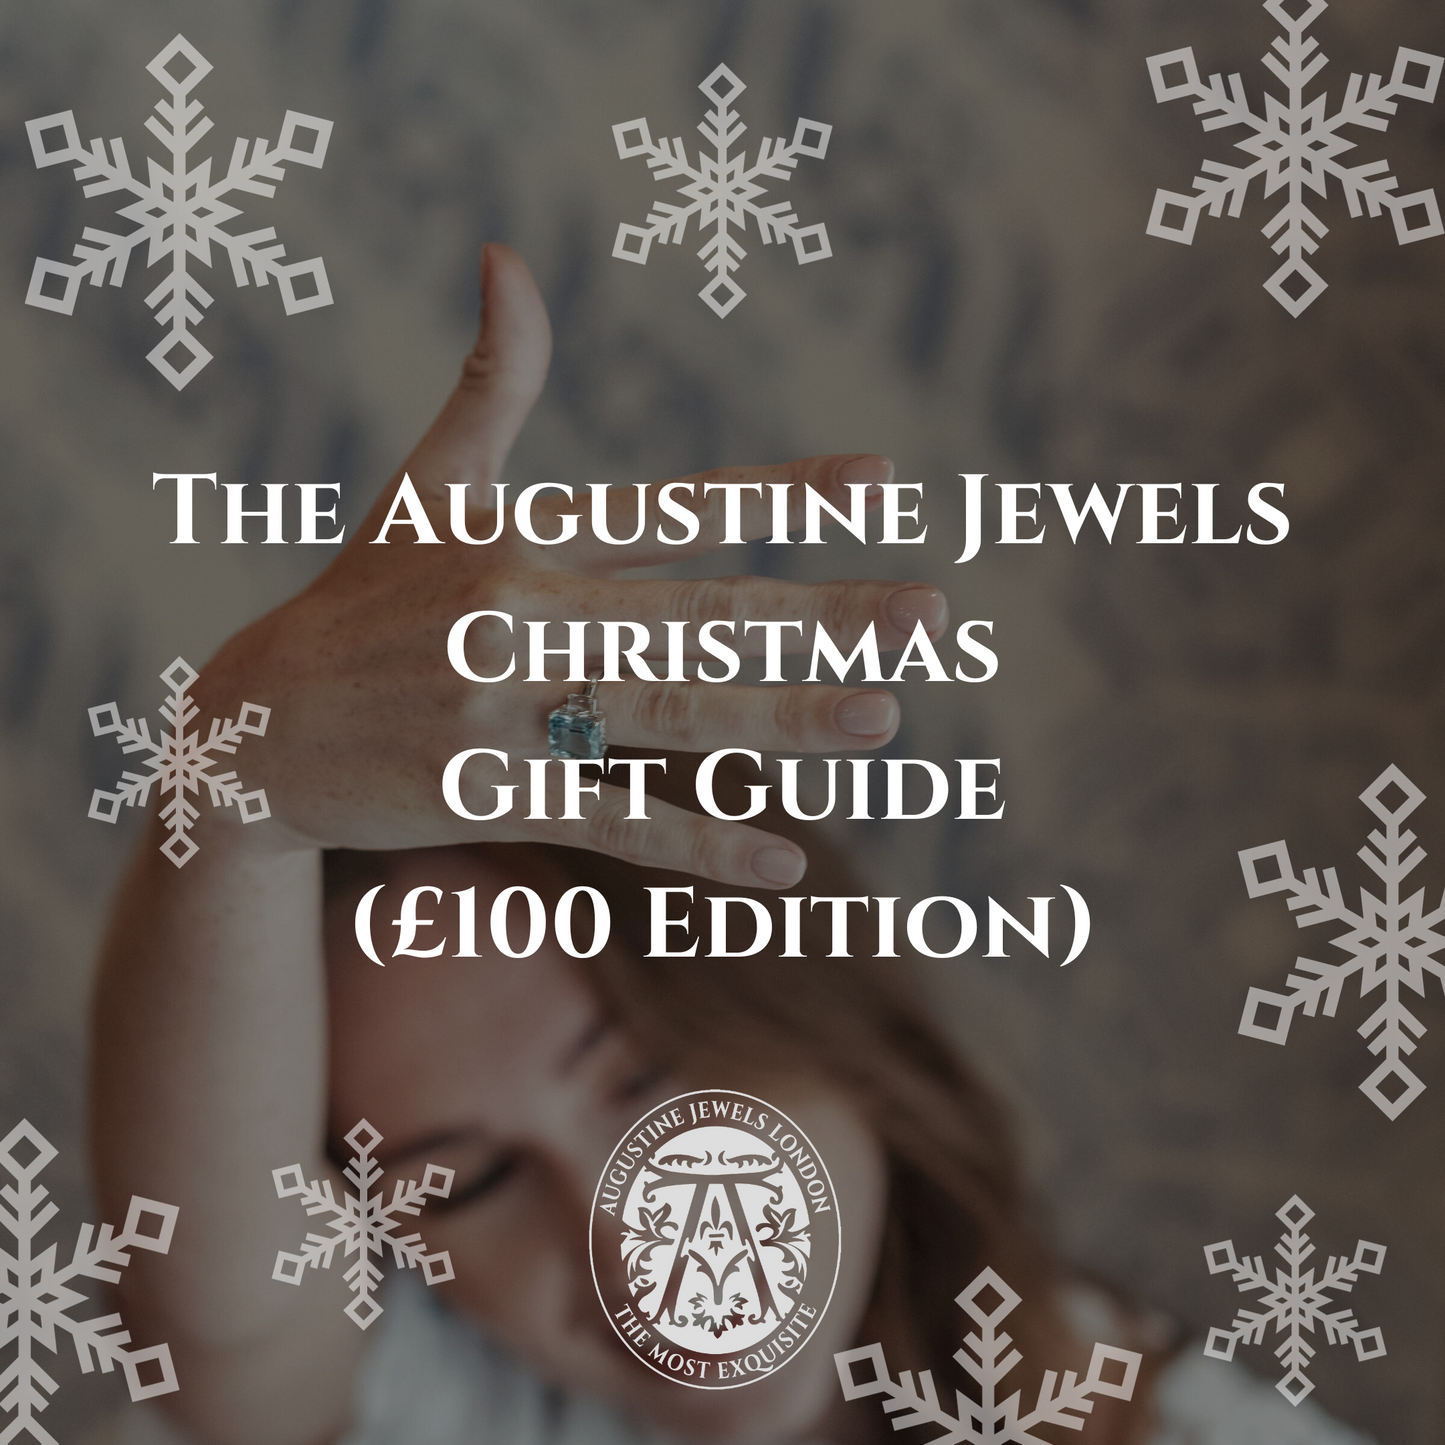 The Augustine Jewels Christmas Gift Guide (£100 Edition)